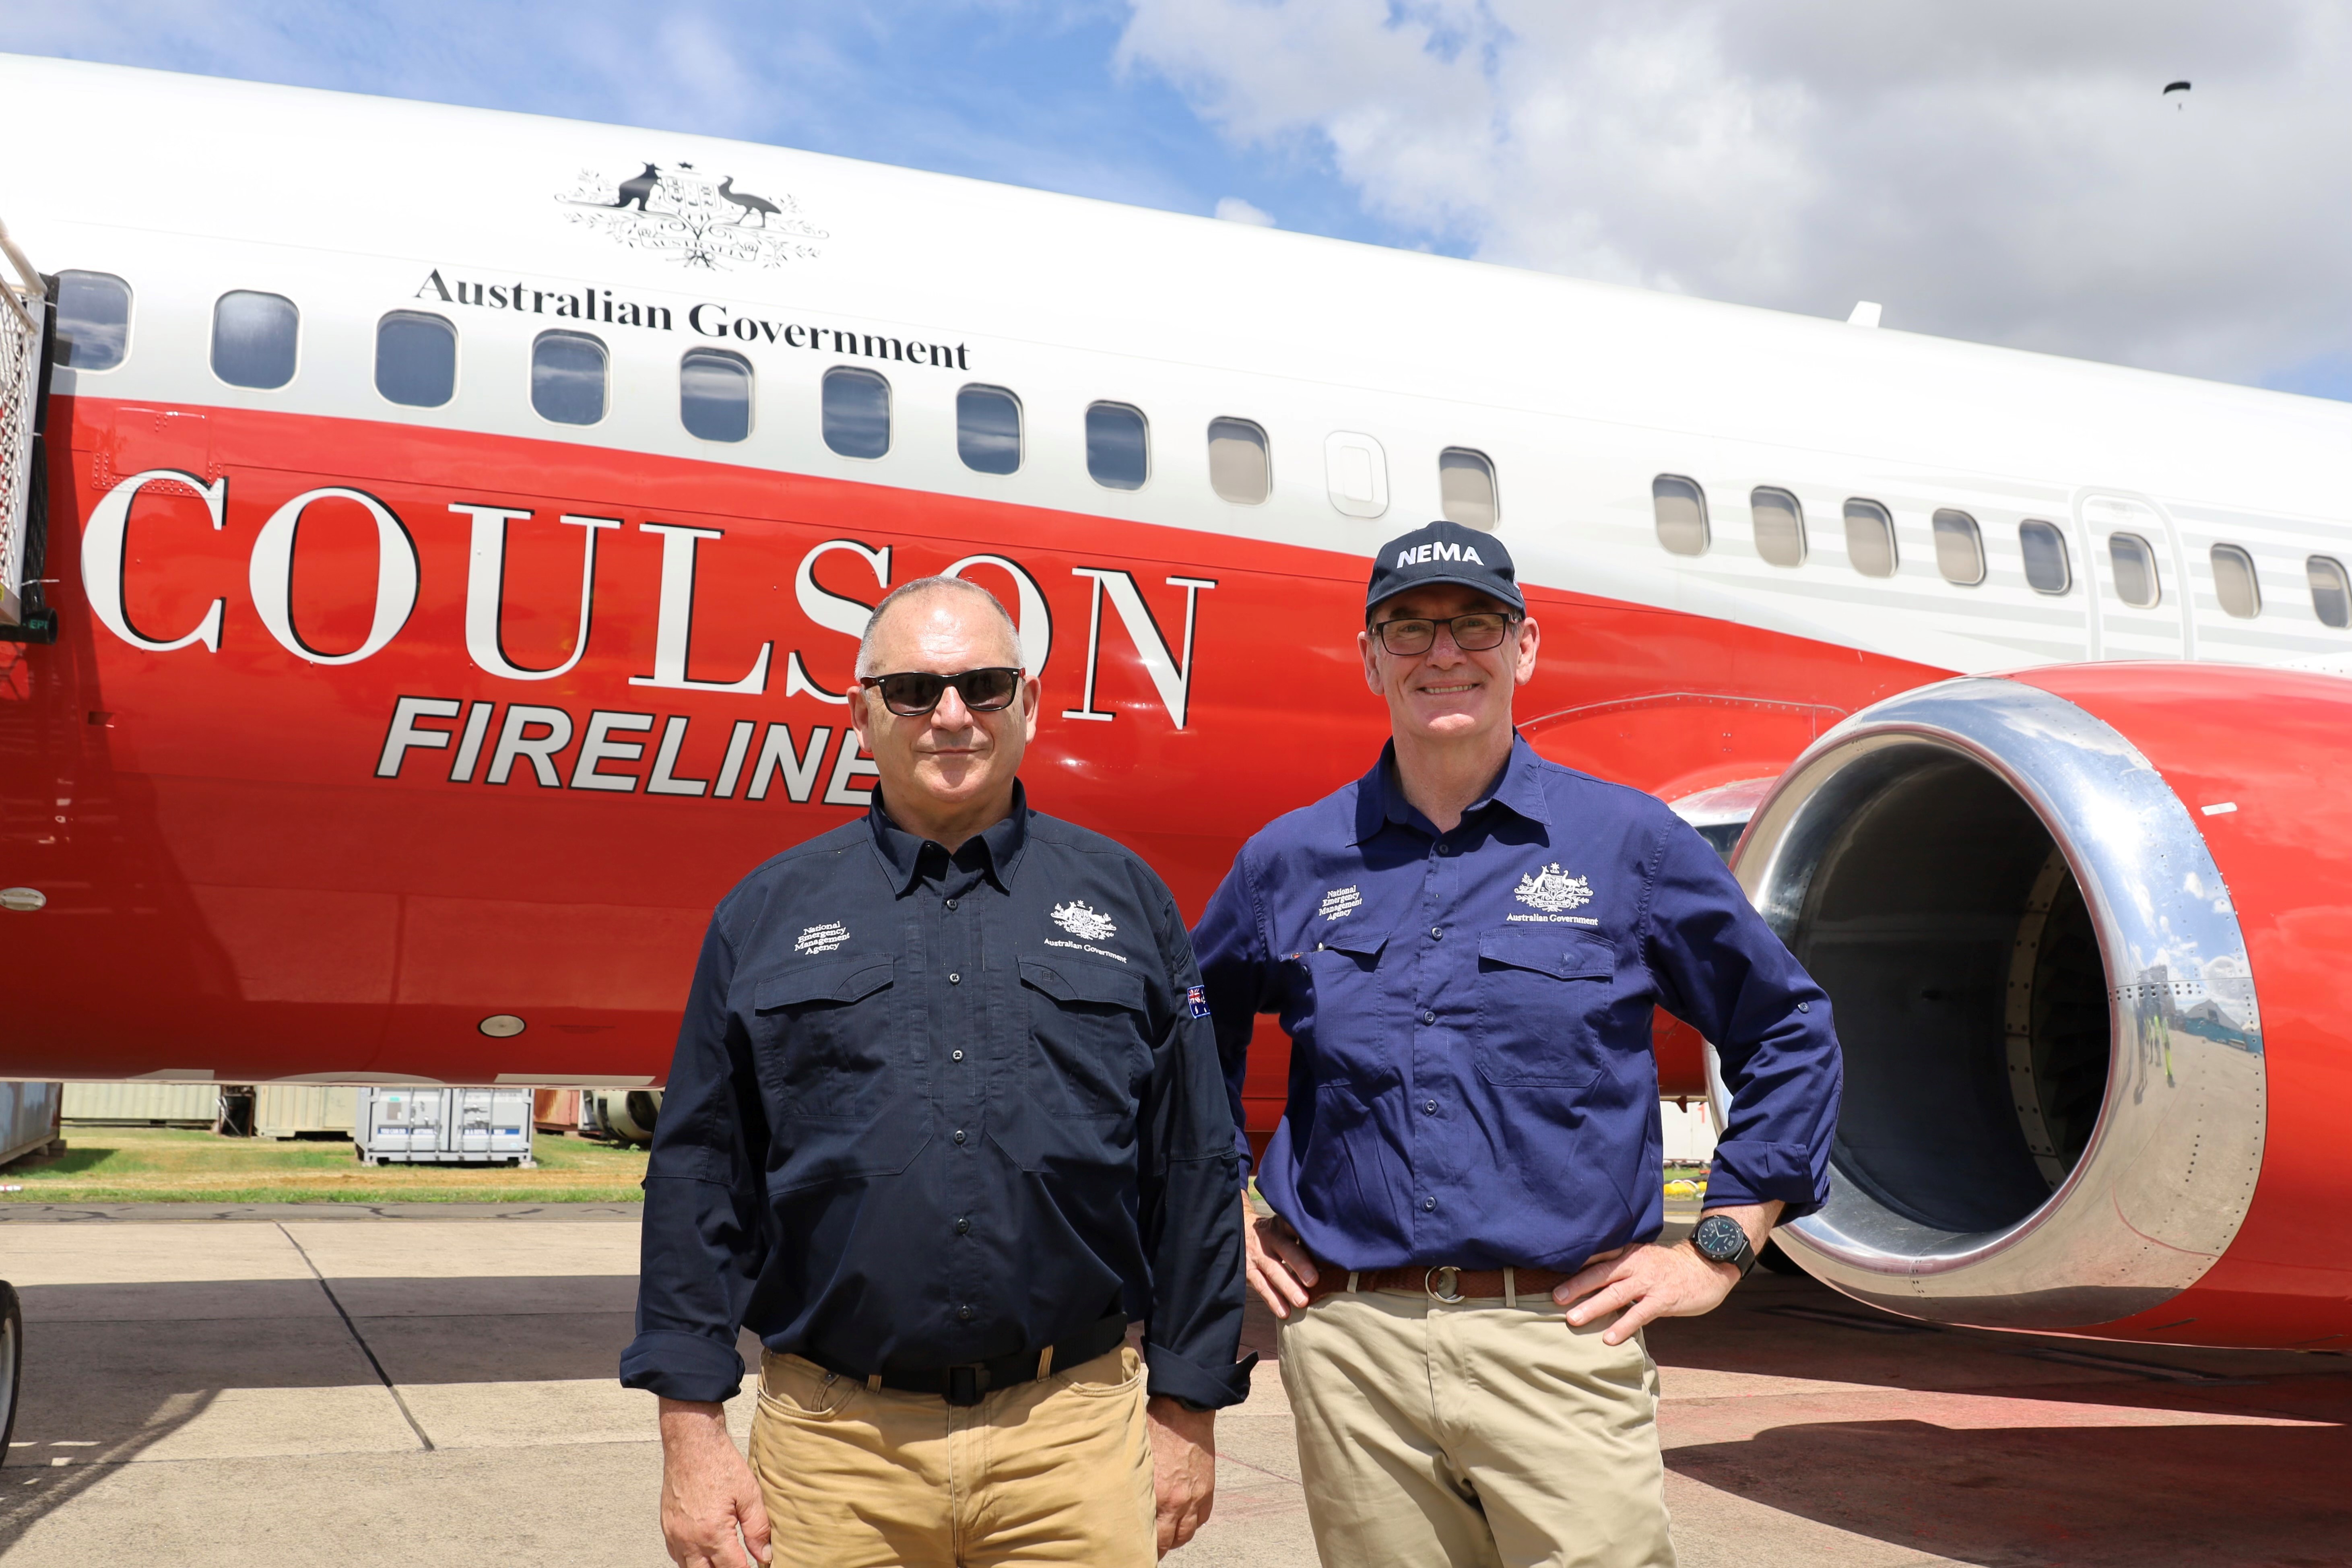 NEMA's Deputy Coordinator-General and Coordinator-Genera posing in front of the National Large Air Tanker